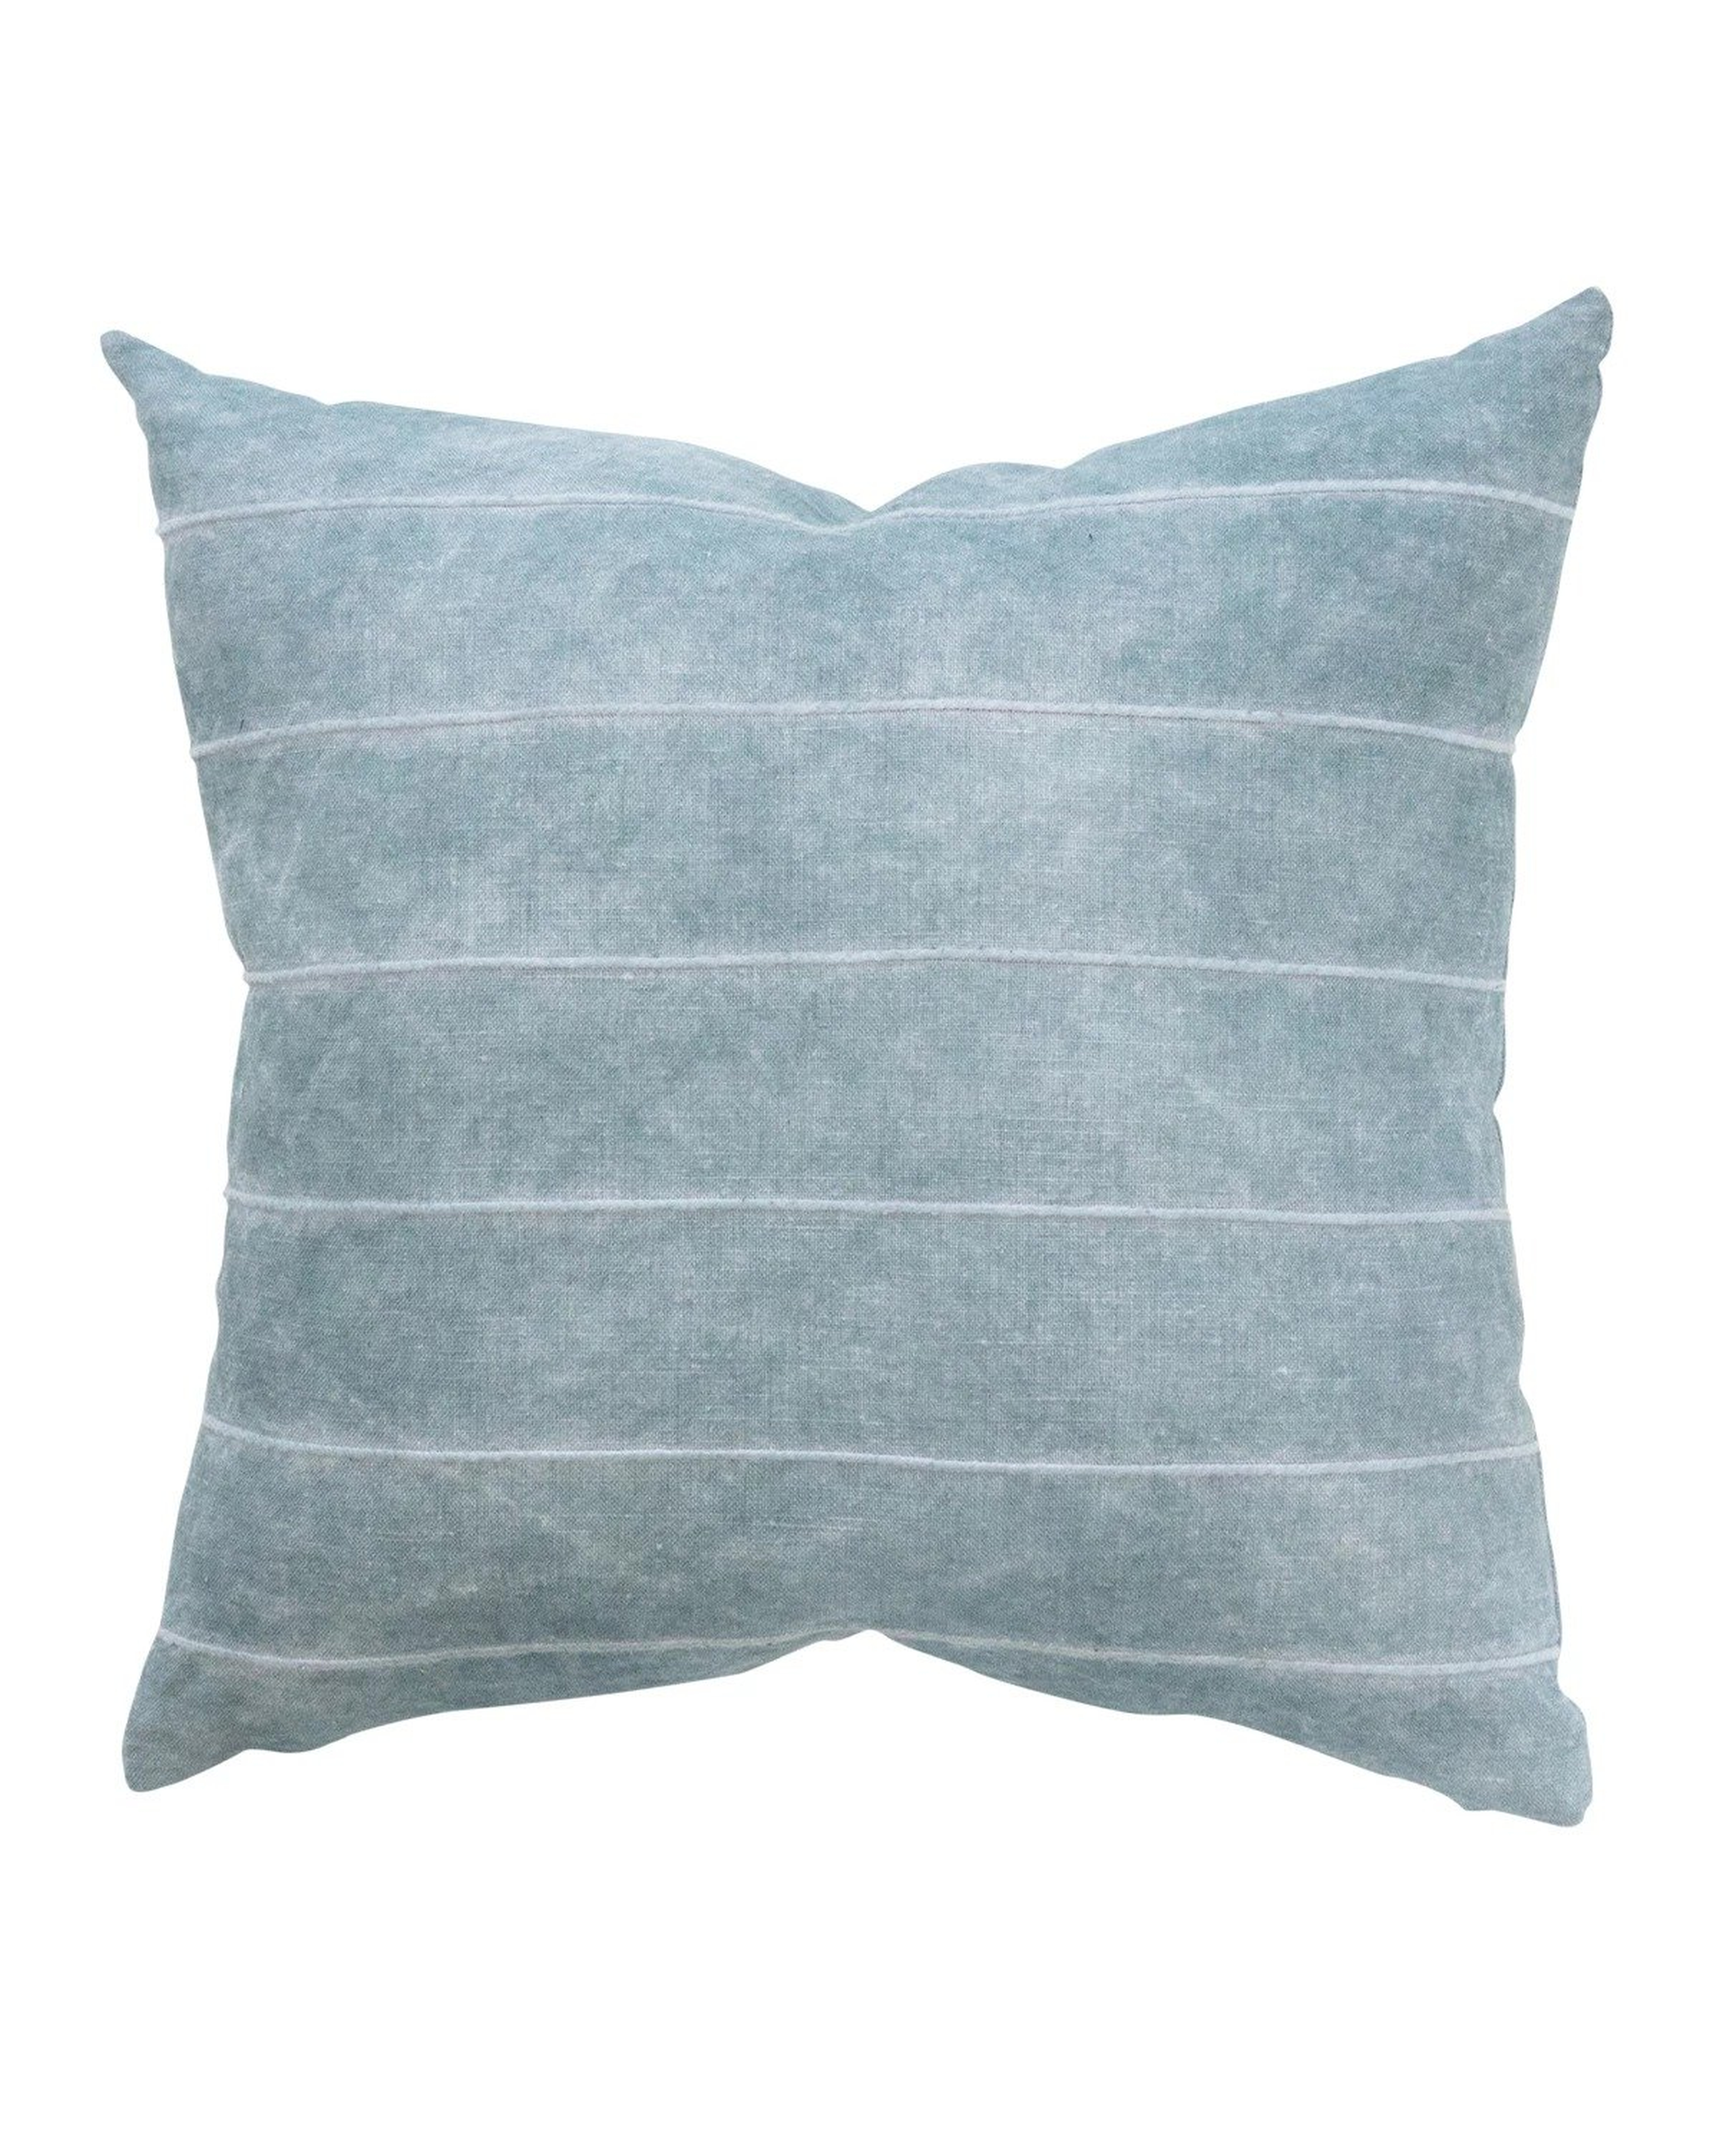 ABNER PILLOW WITH DOWN INSERT - BLUE DUSK - 22" x 22" - McGee & Co.